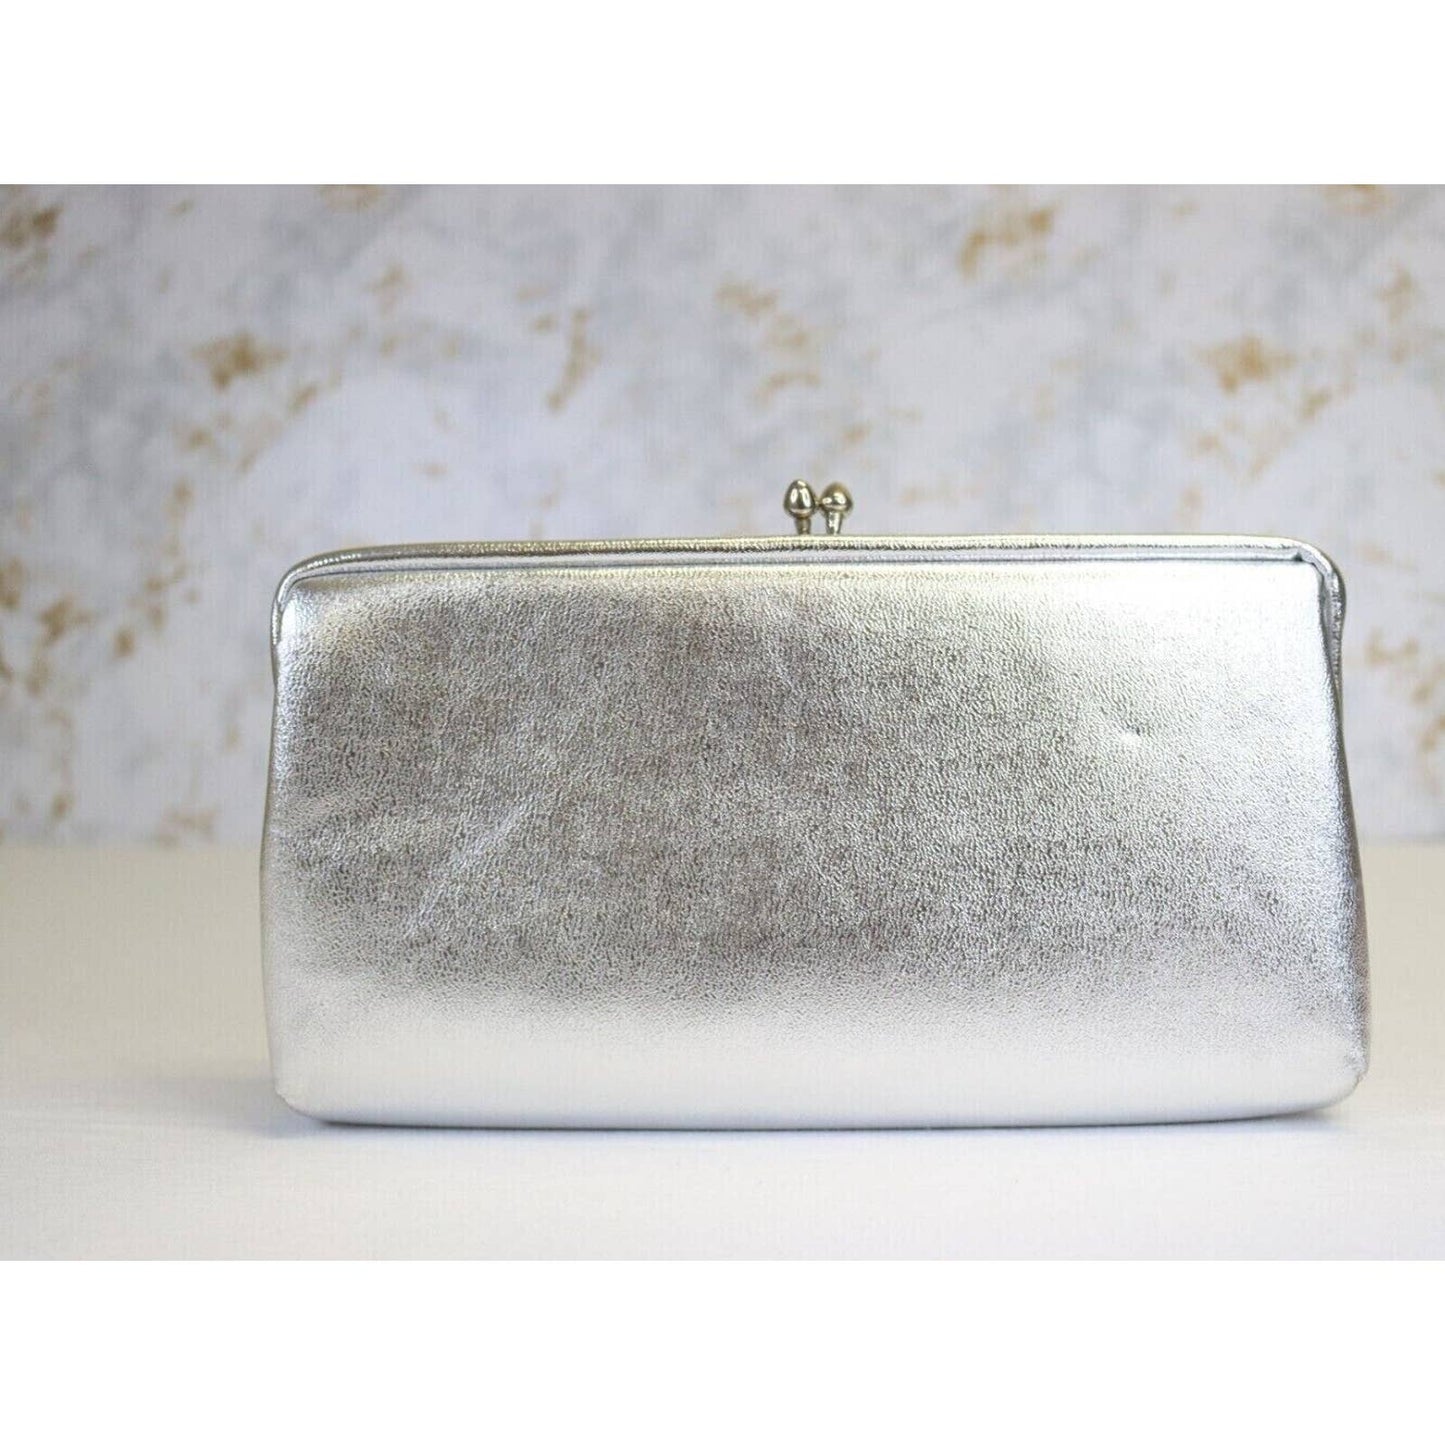 Vintage Ande Silver Clutch With Chain Handle Hand Bag Purse